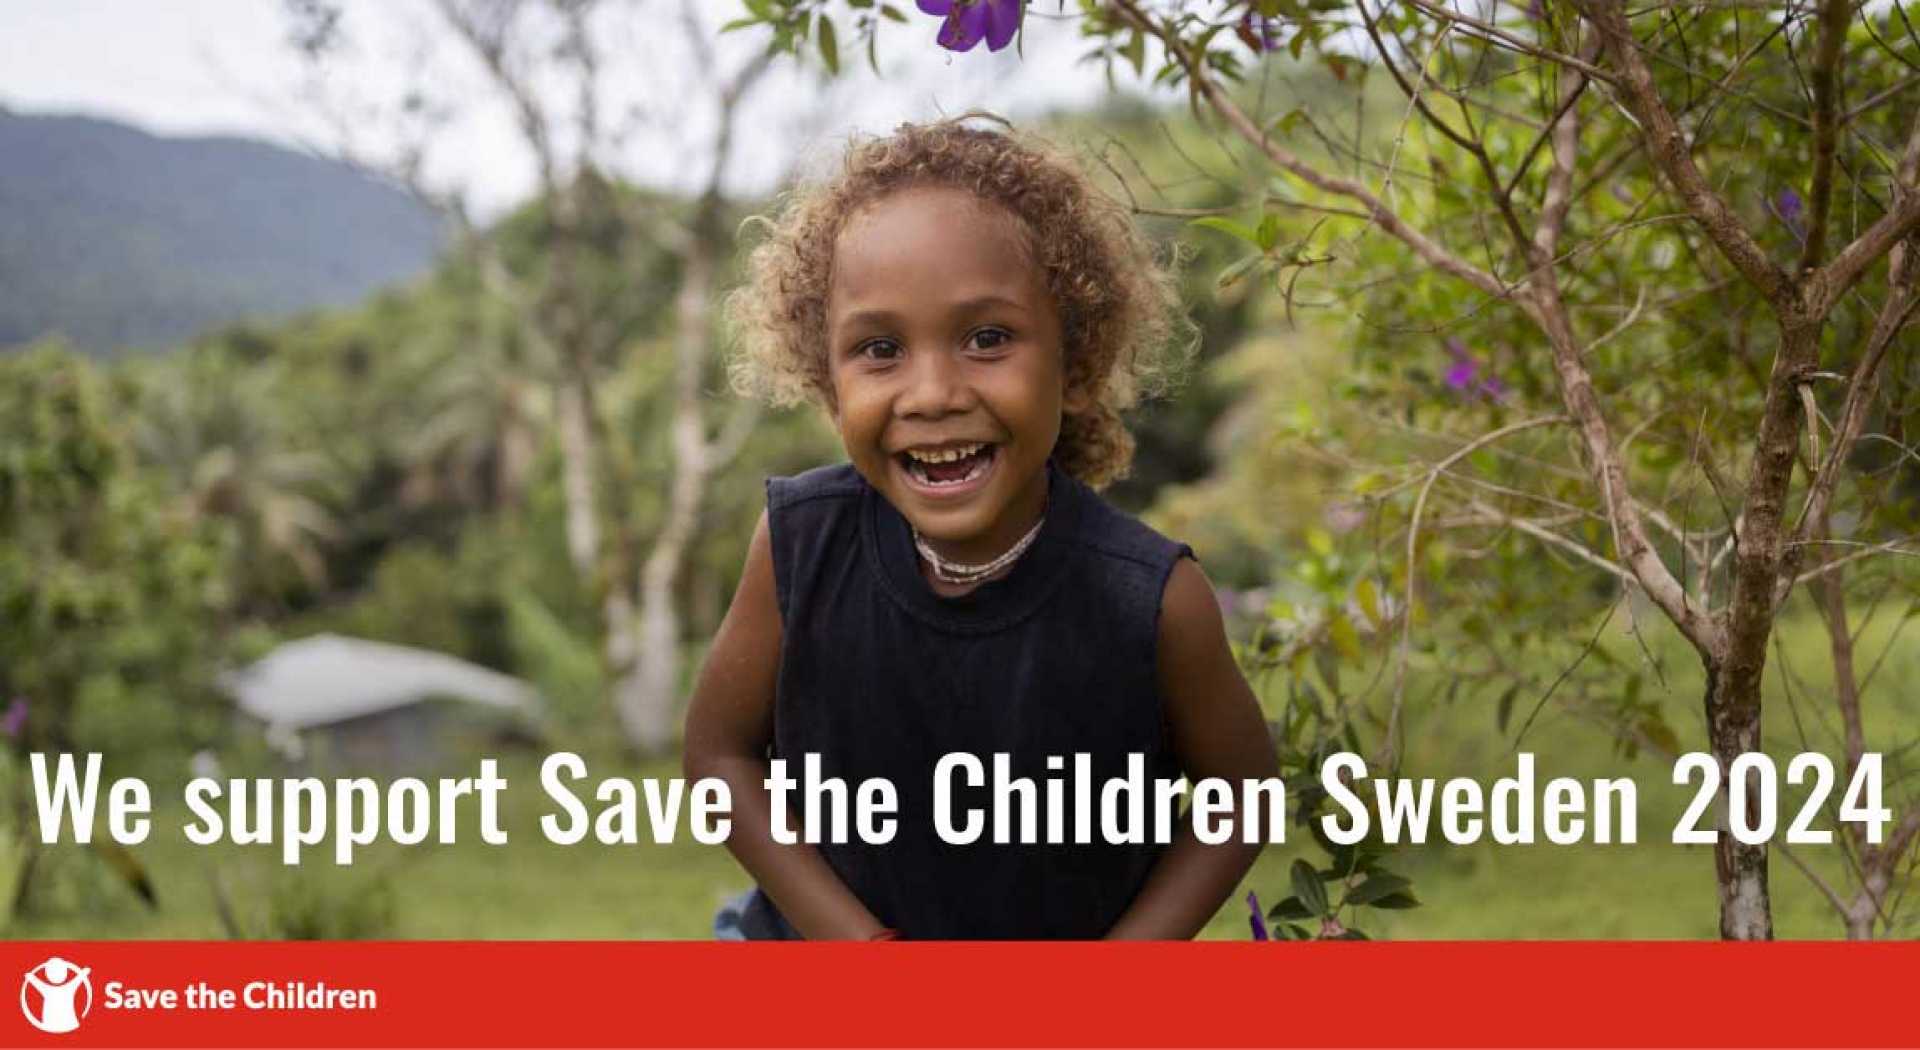 Jewelry by Moette supports Save the Children 2024